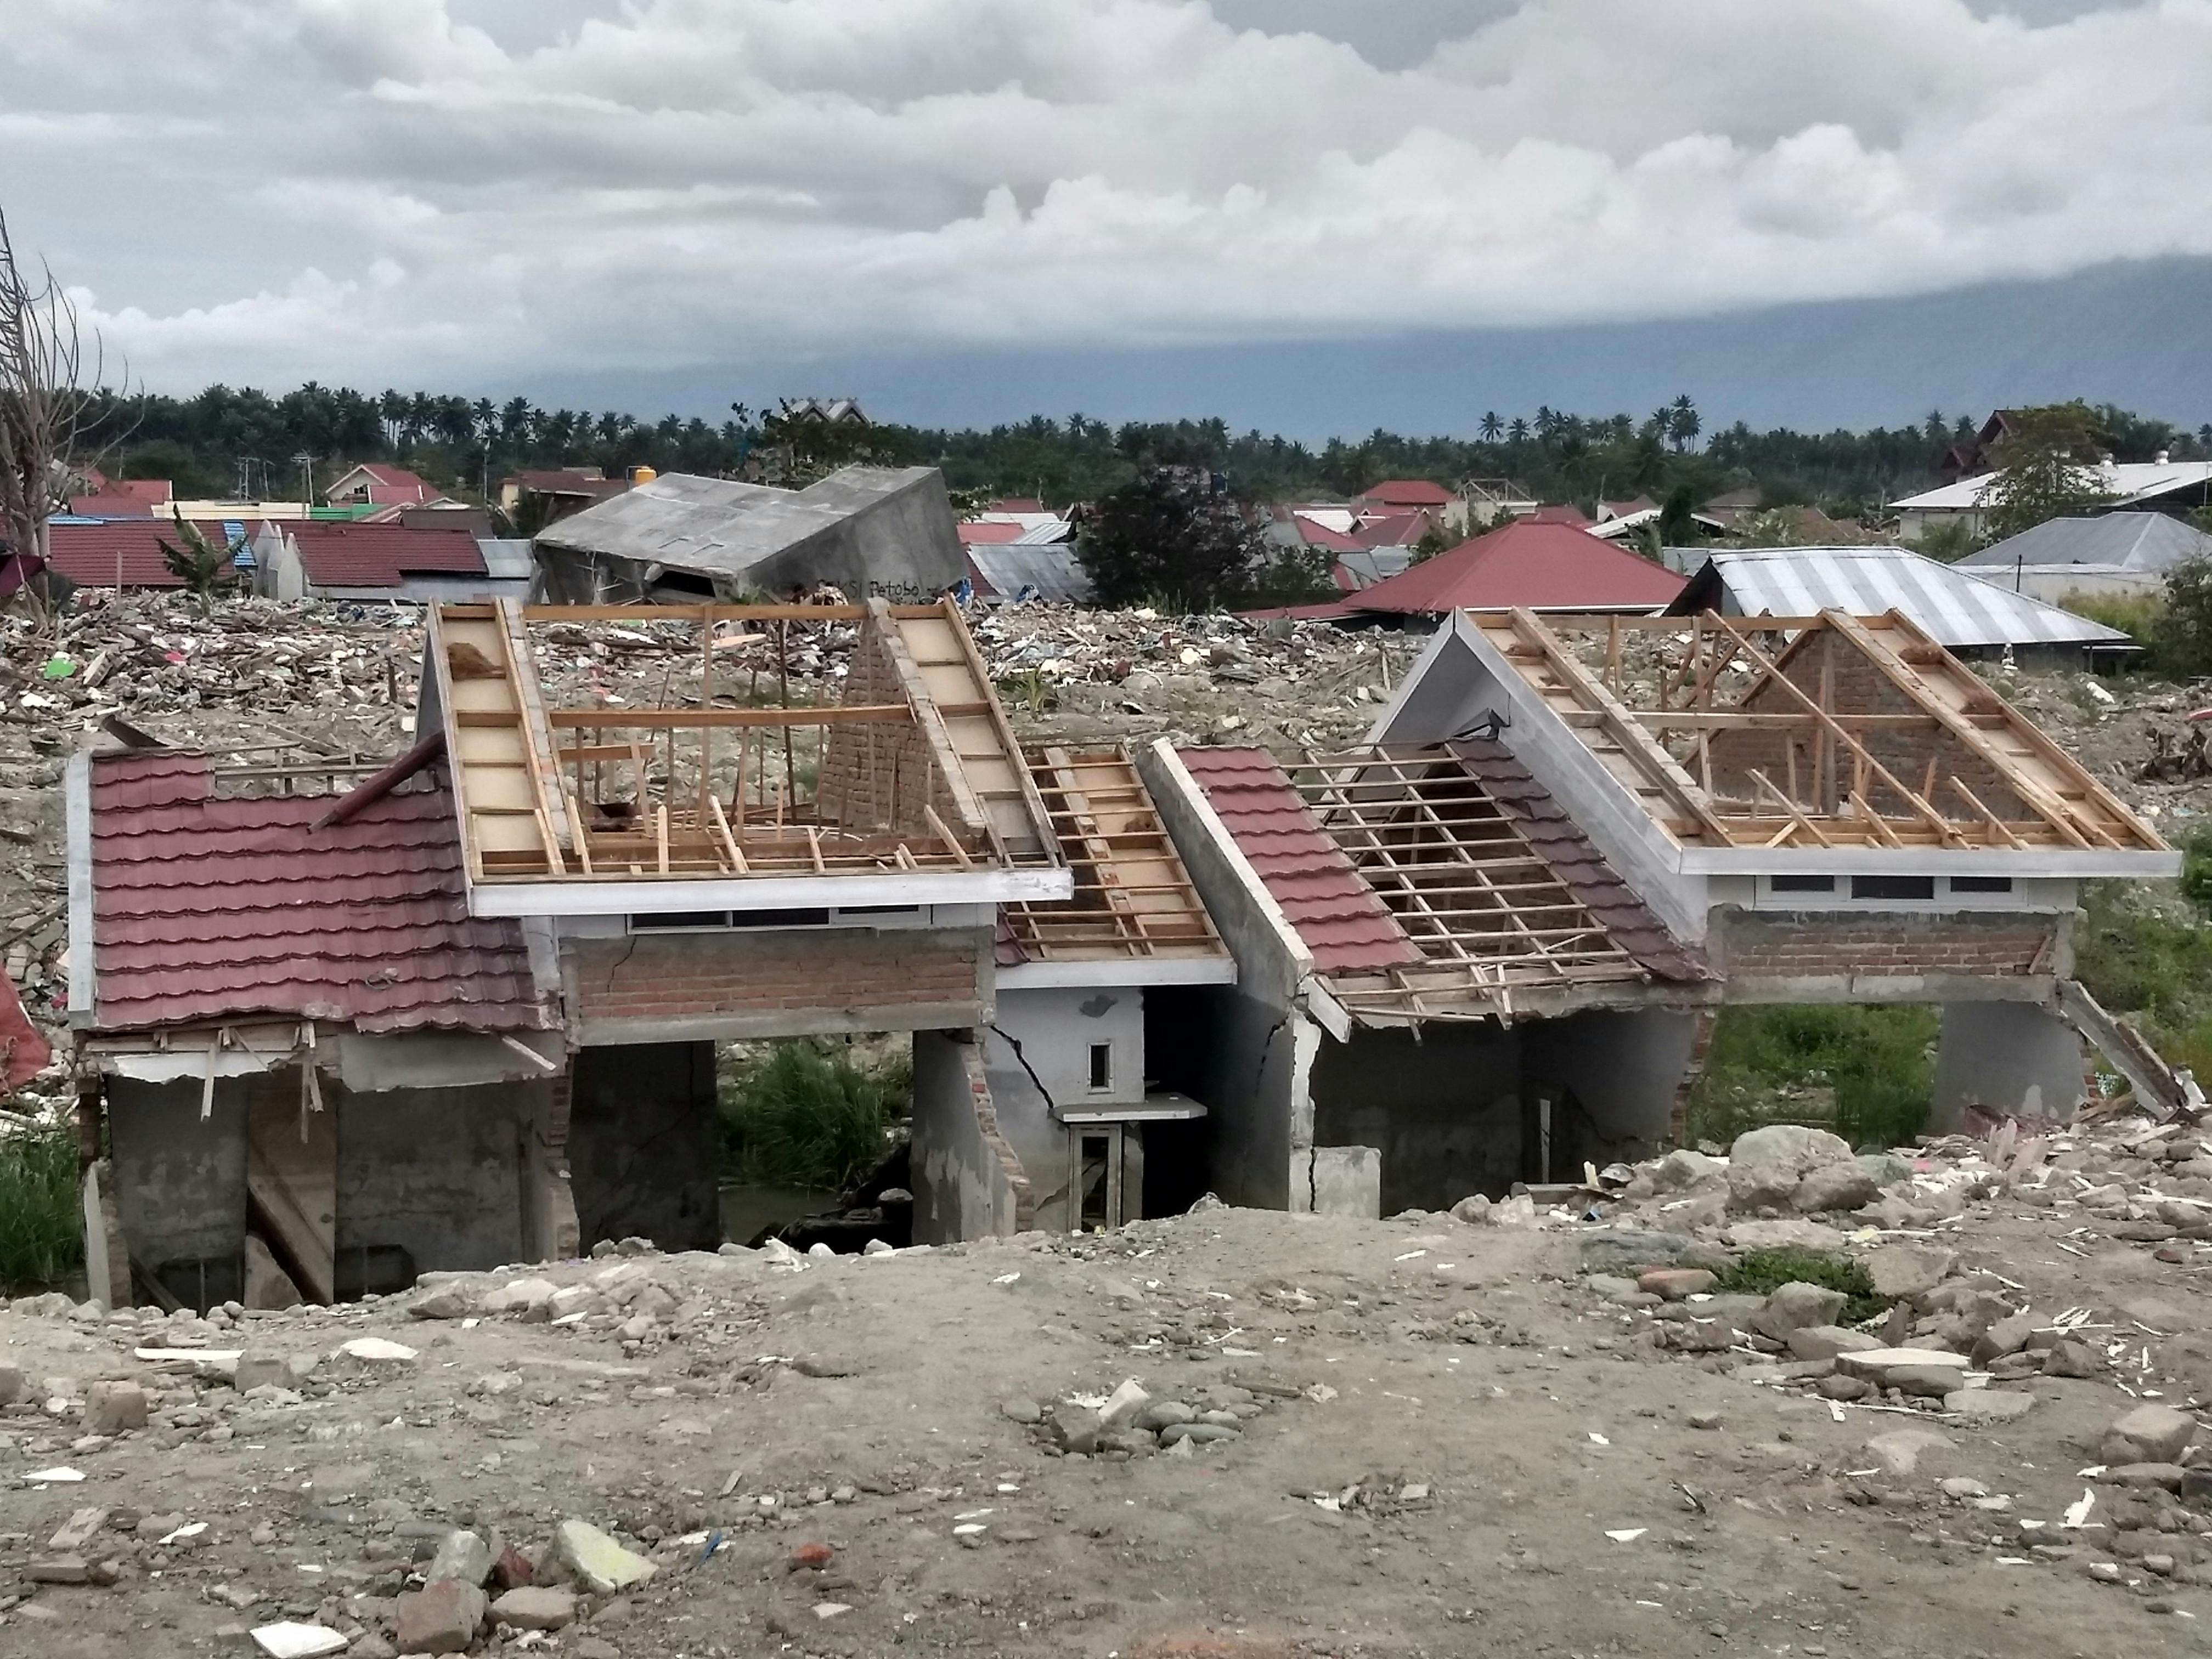 Post-disaster damage in Sulawesi, Indonesia